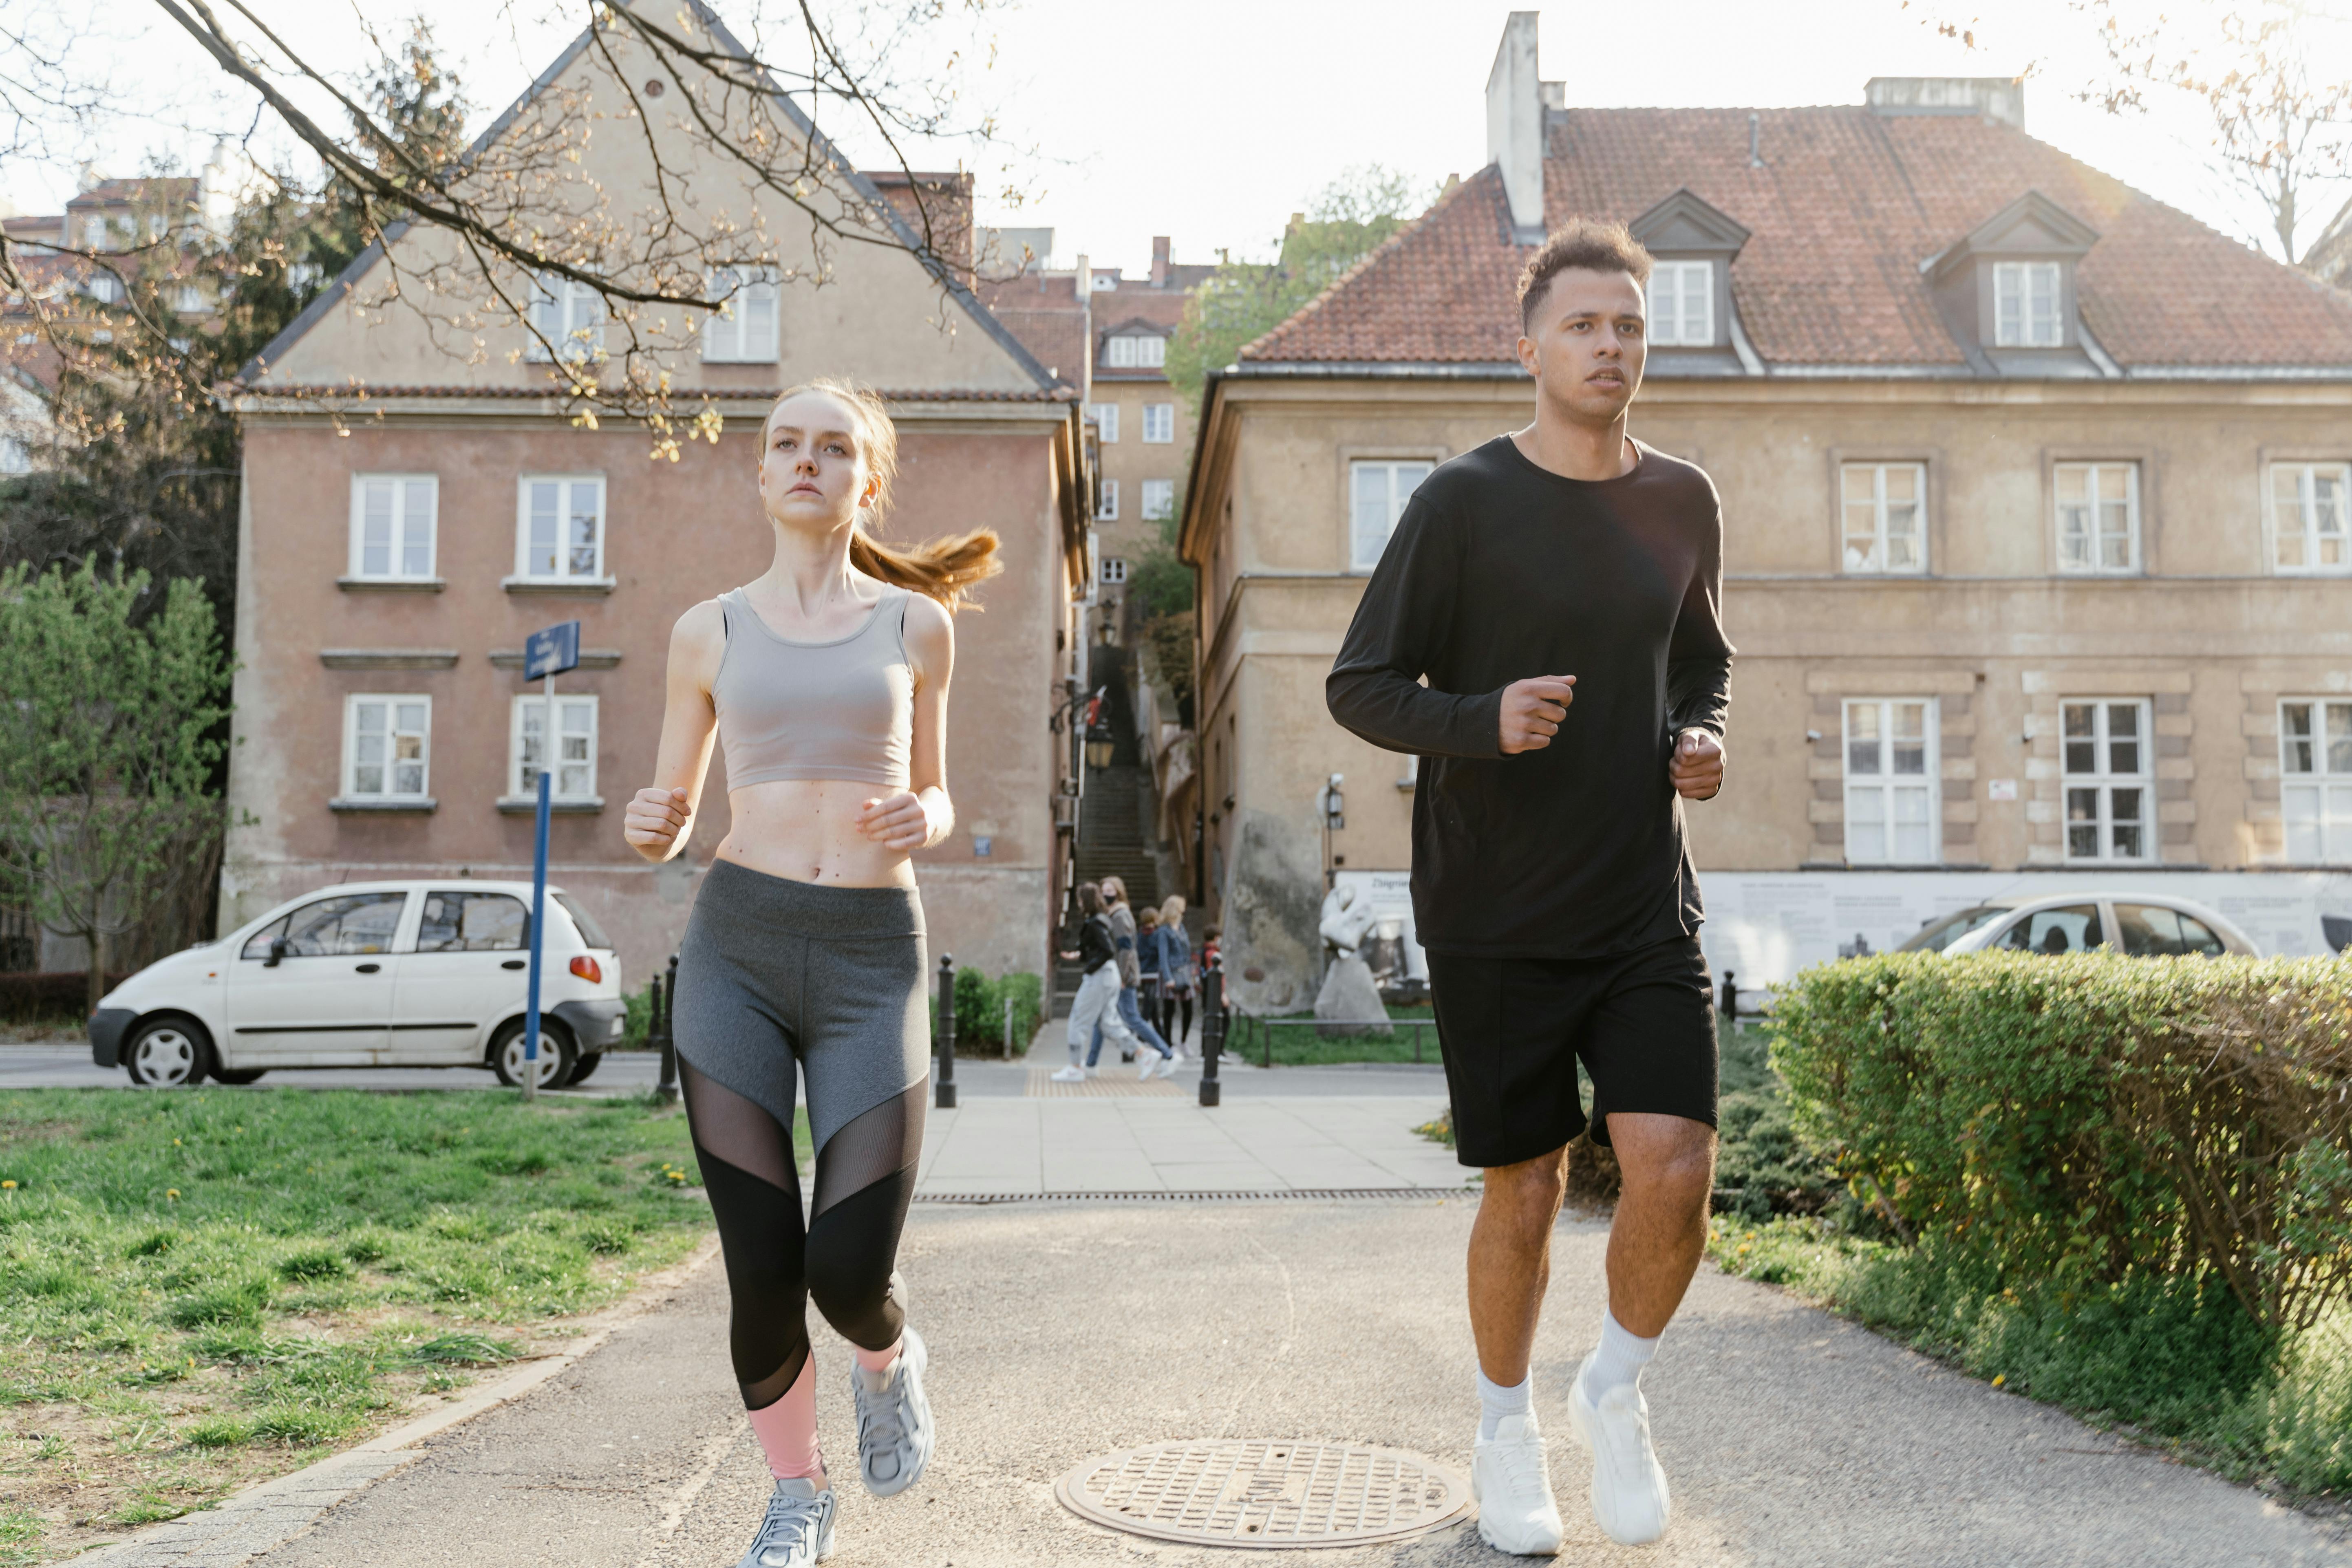 man and woman jogging on the street